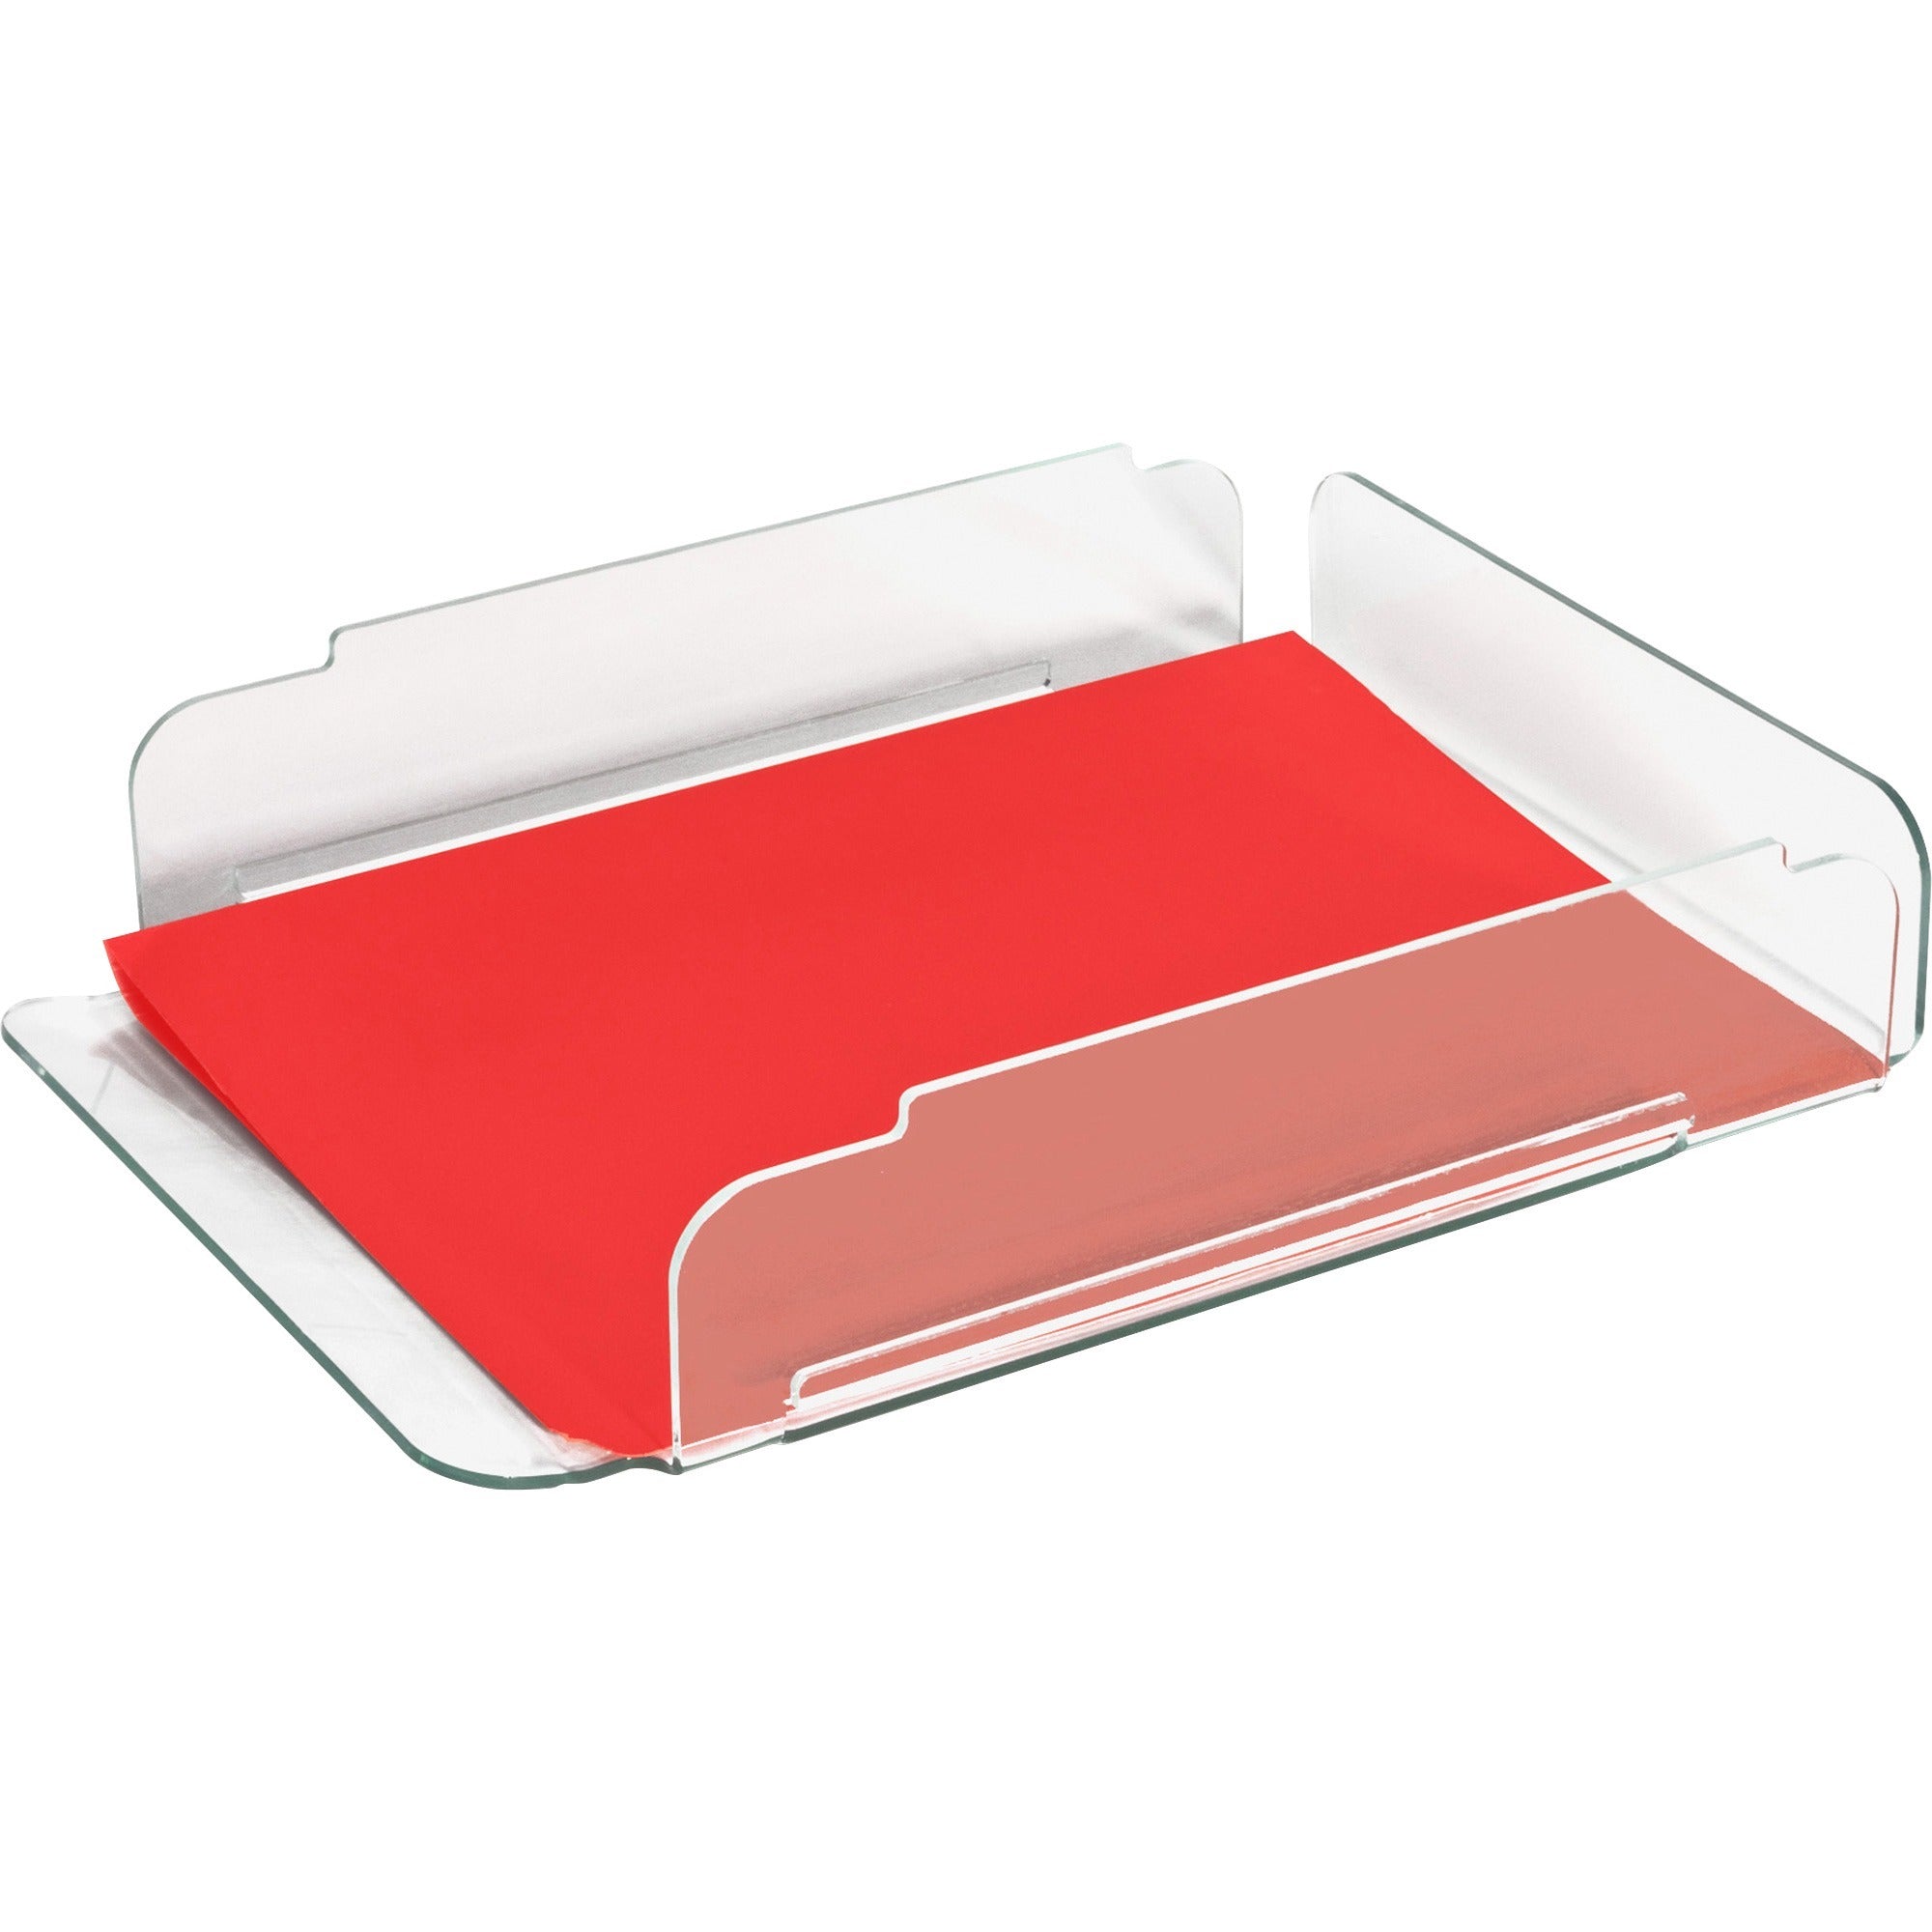 Lorell Single Stacking Document Tray - Desktop - Durable, Lightweight, Non-skid, Stackable - Clear - Acrylic - 1 Each - 